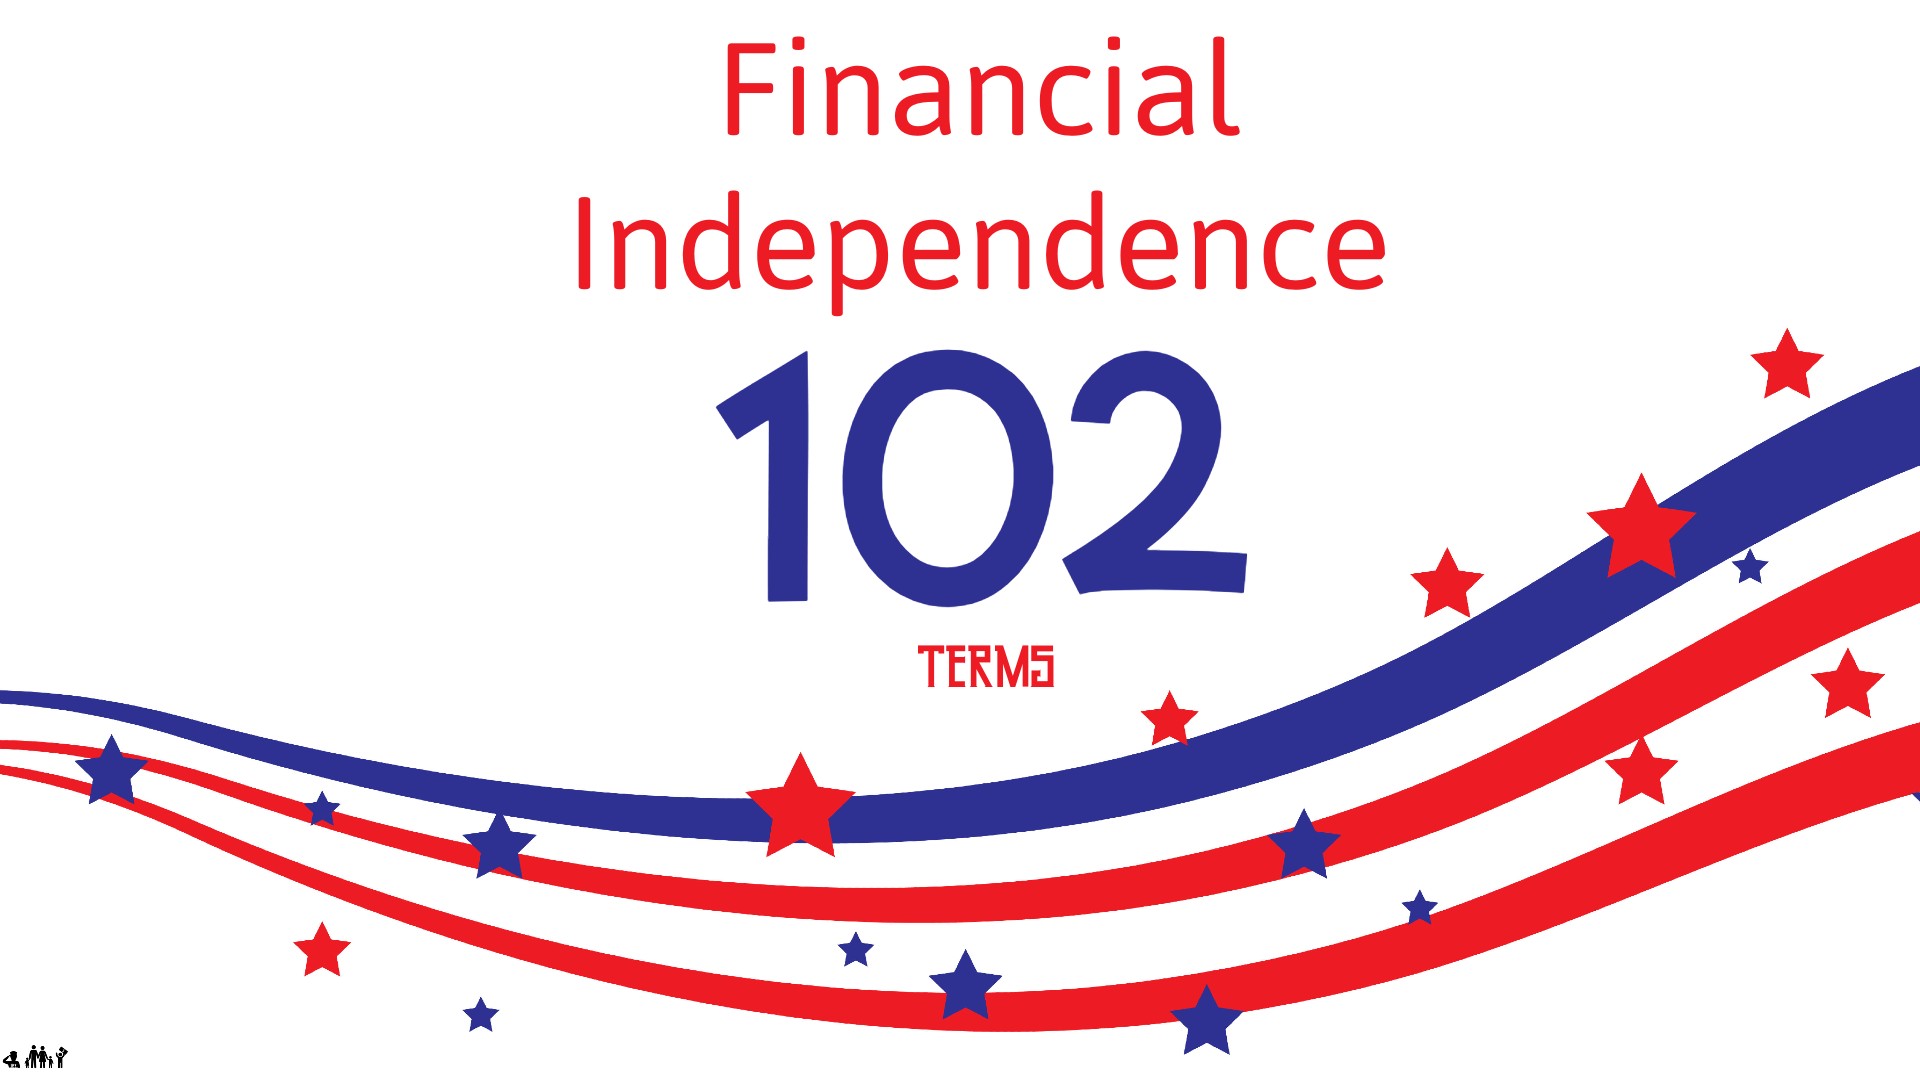 Financial Independence 102: Terms